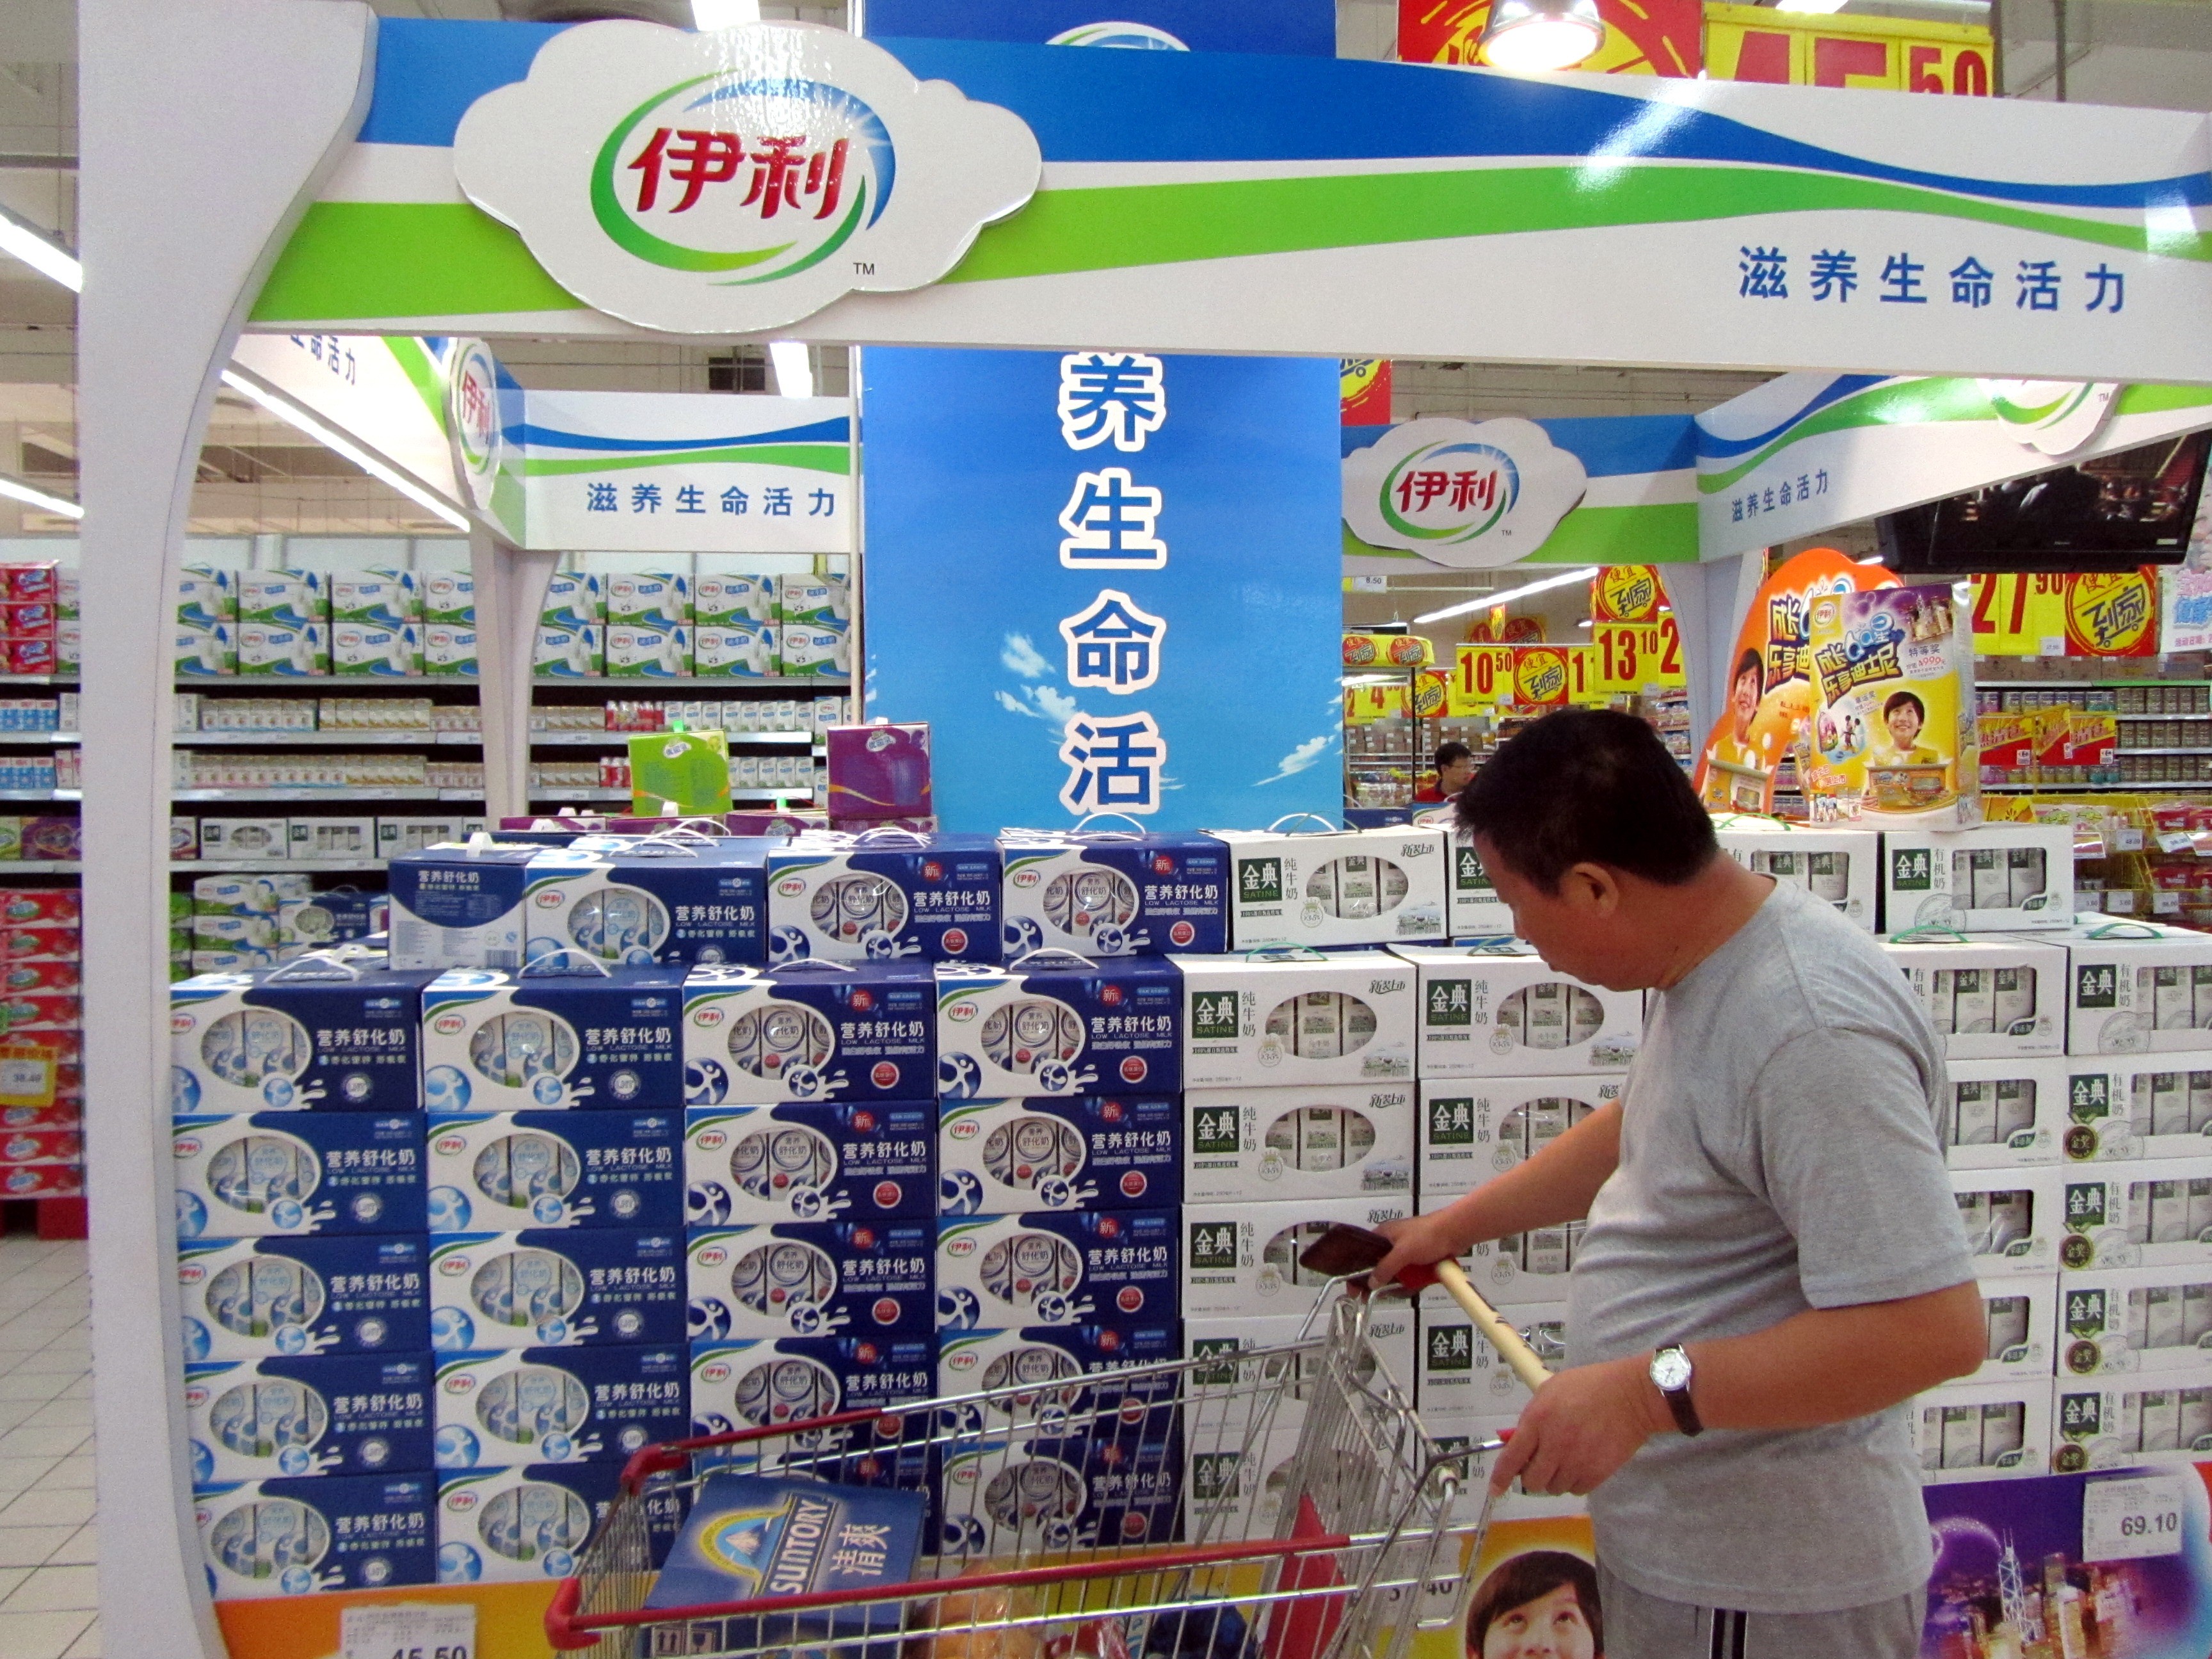 Yili milk products at a market in Shanghai. The company says rival Mengniu has infringed upon its interests by securing the status of joint global beverages sponsor of the Winter Olympics. Photo: Imaginechina